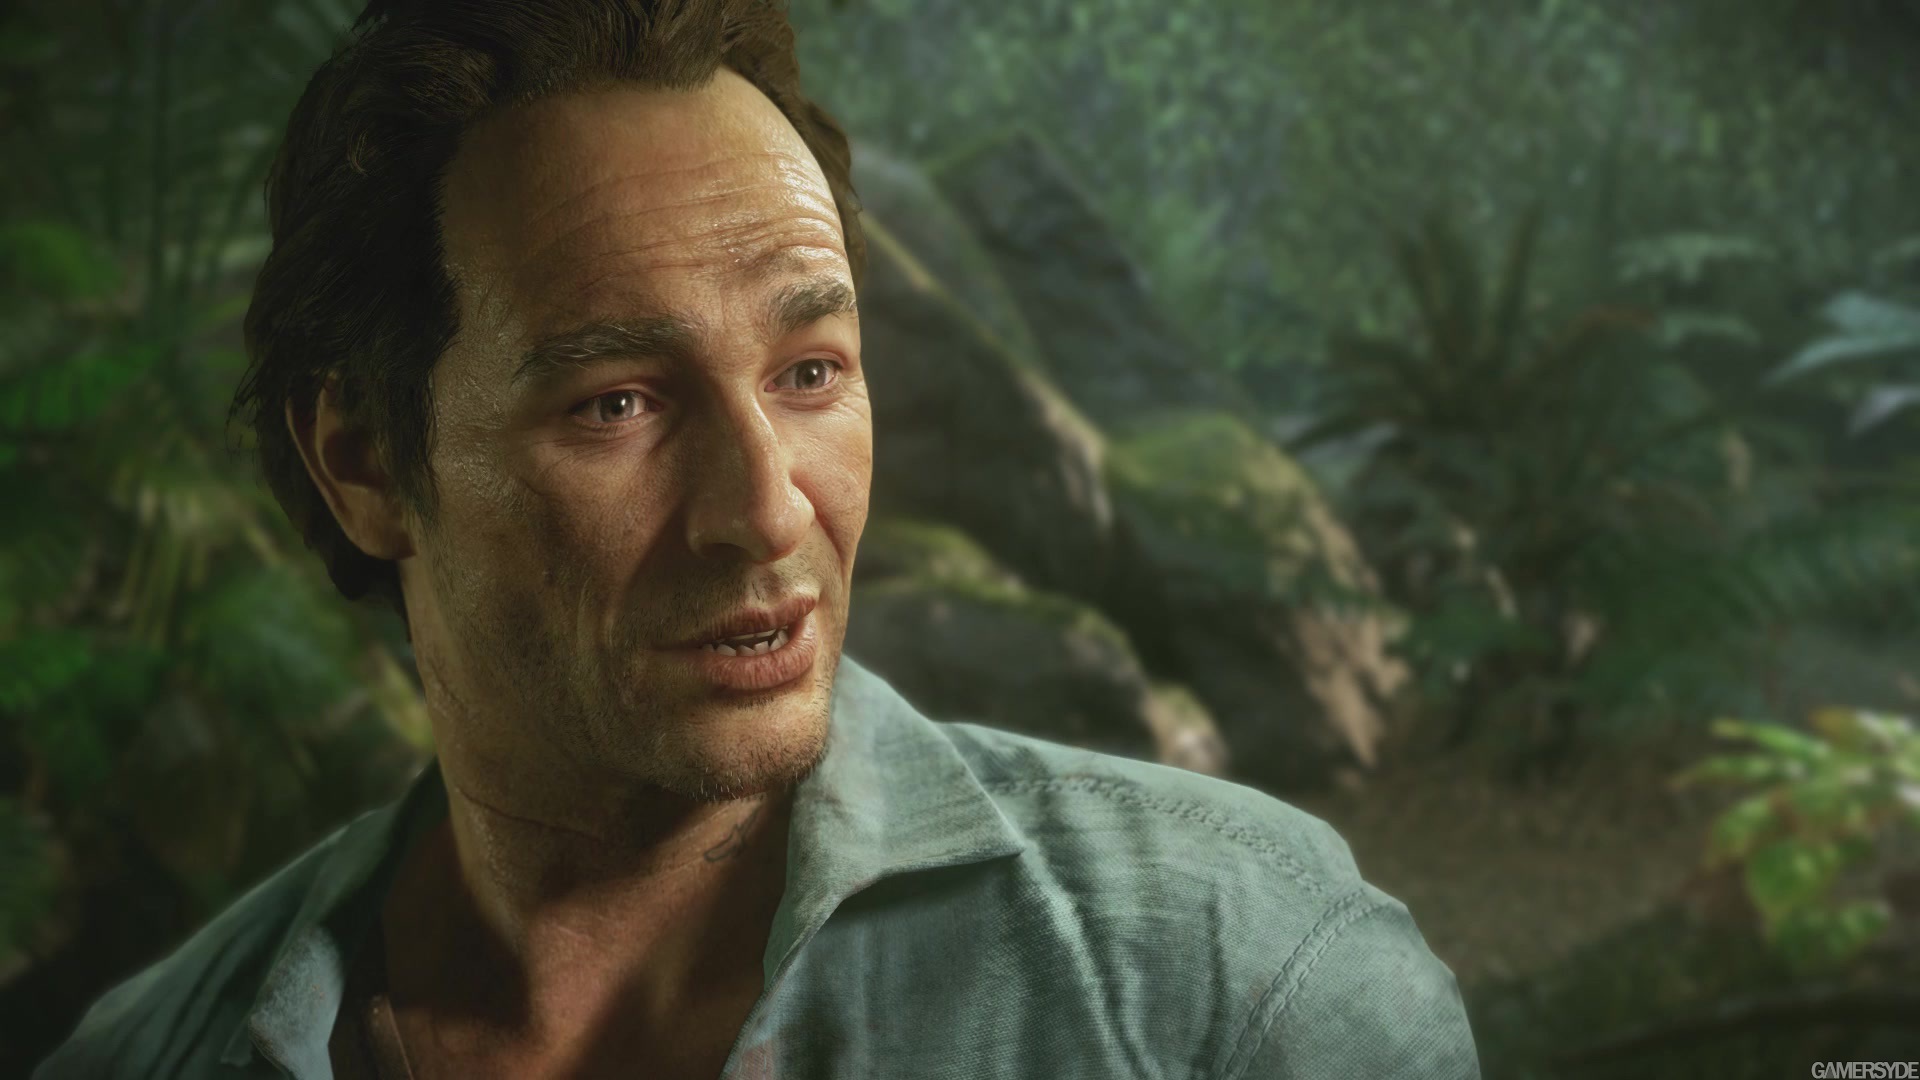 image_uncharted_4_a_thief_s_end-27127-2995_0025.jpg